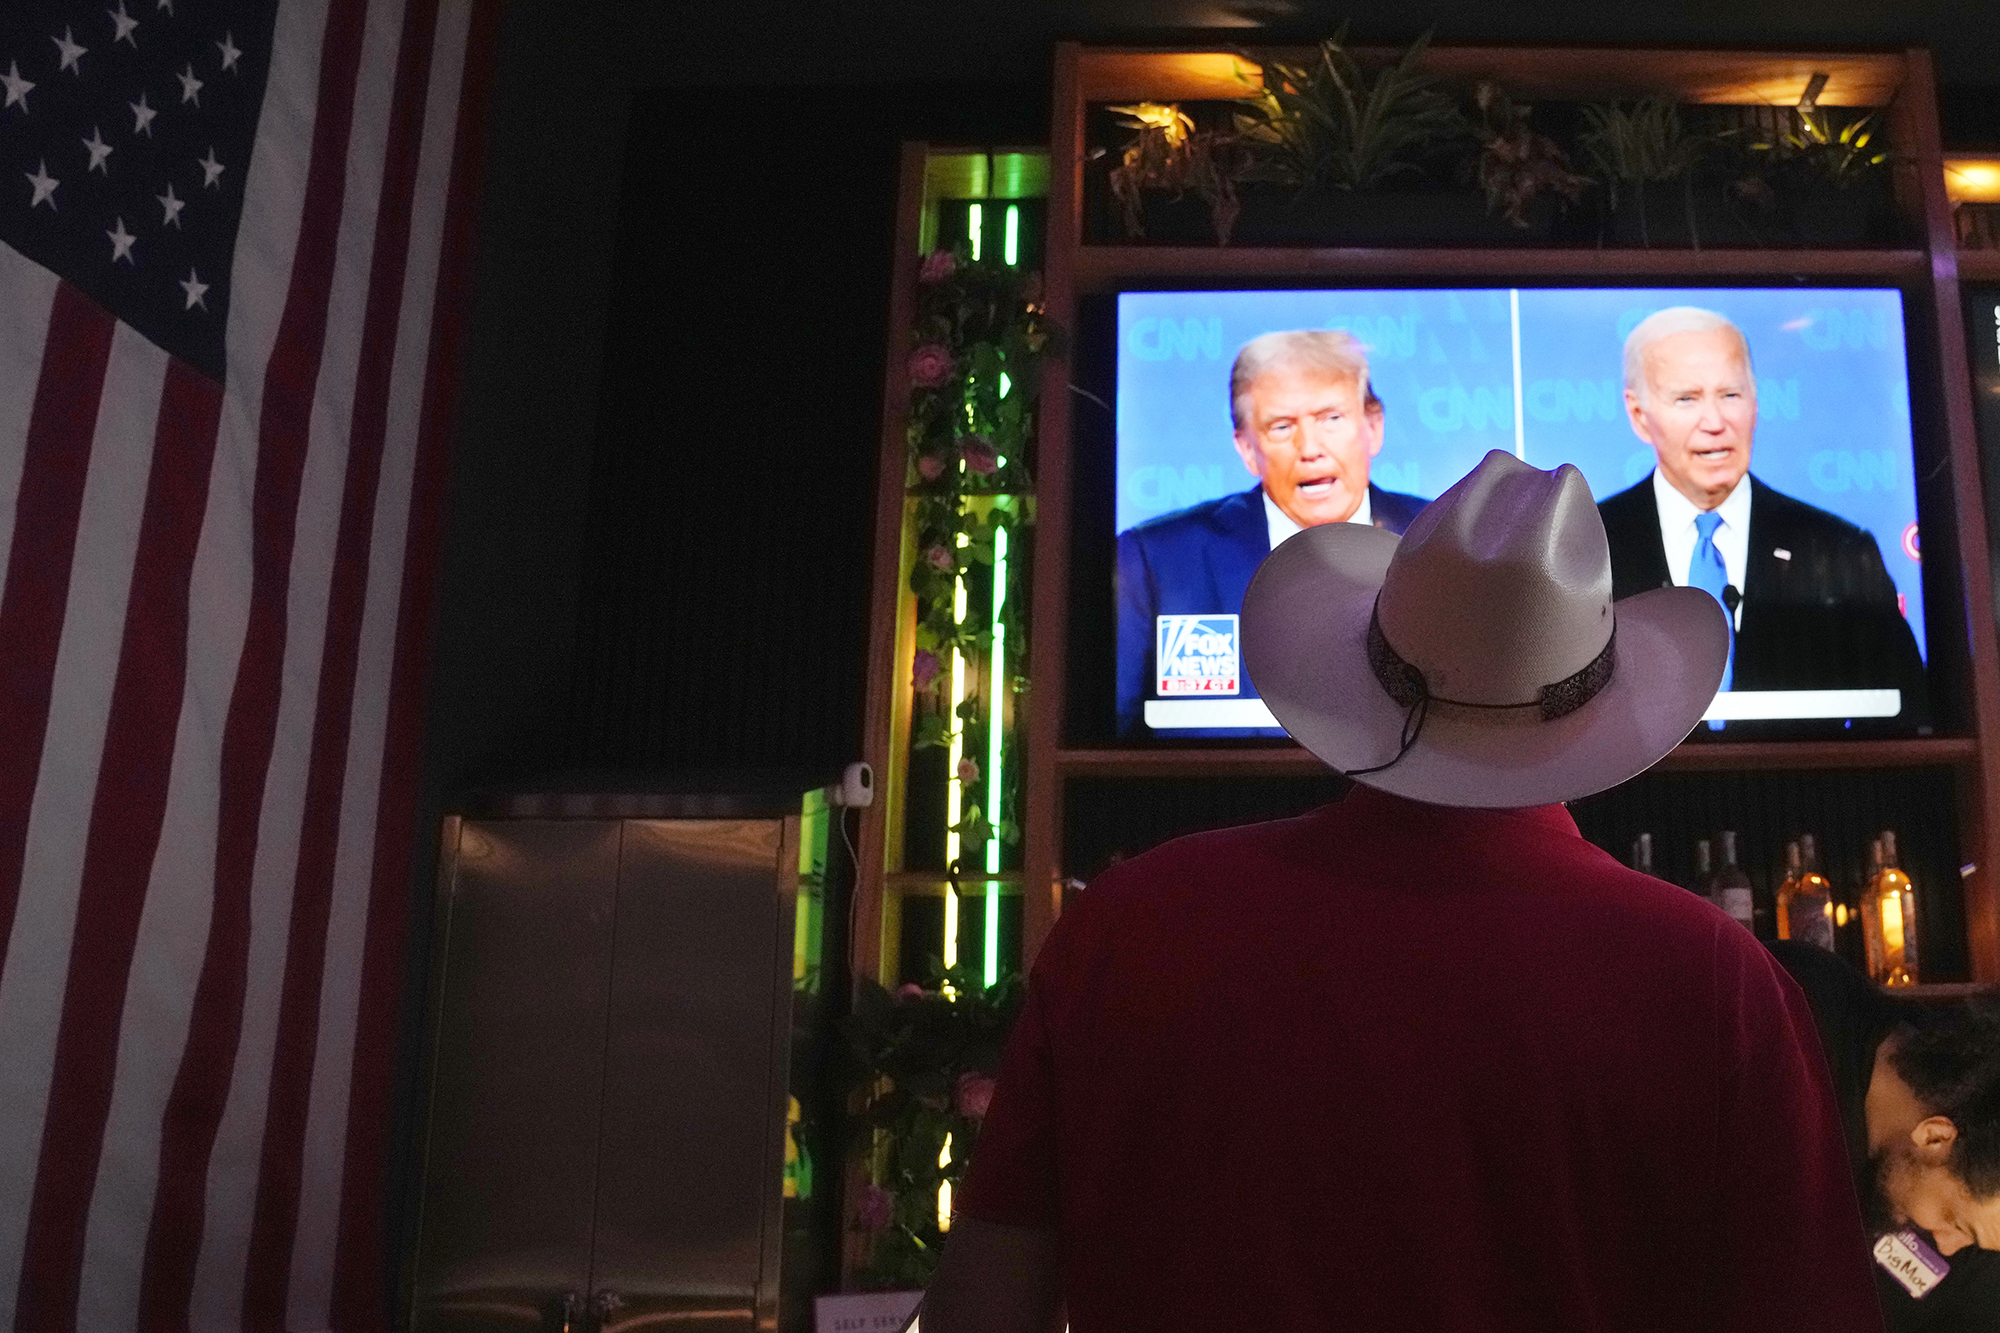 The back of a man wearing a white cowboy hat near an American flag can be seen in front of a television showing the first 2024 presidential debate between Biden and Trump.